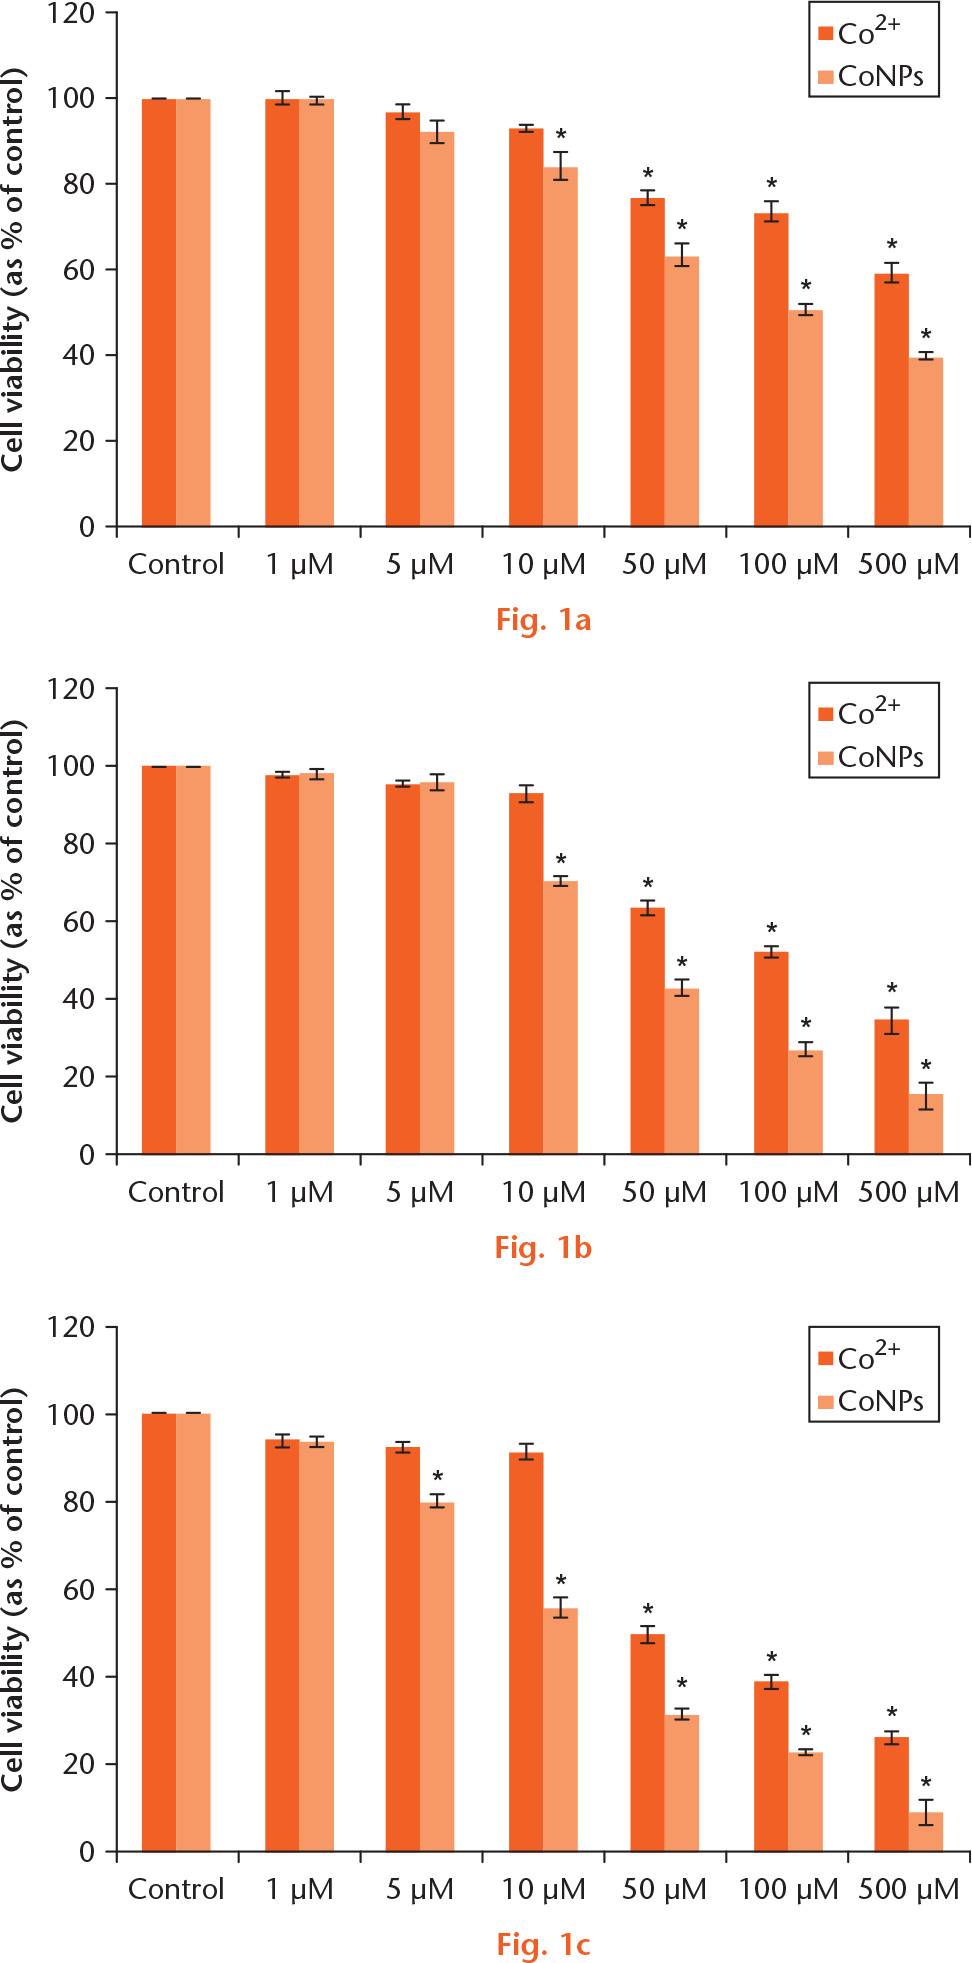  
            Viability of Balb/3T3 cells exposed to cobalt nanoparticles (CoNPs) and cobalt ions (Co2+) for a) four, b) 24, c) and 48 hours, as determined by Cell-Counting Kit 8 assay. All data were expressed as means ± standard deviation of three independent experiments performed in triplicate. *p < 0.05 compared with the control group.
          